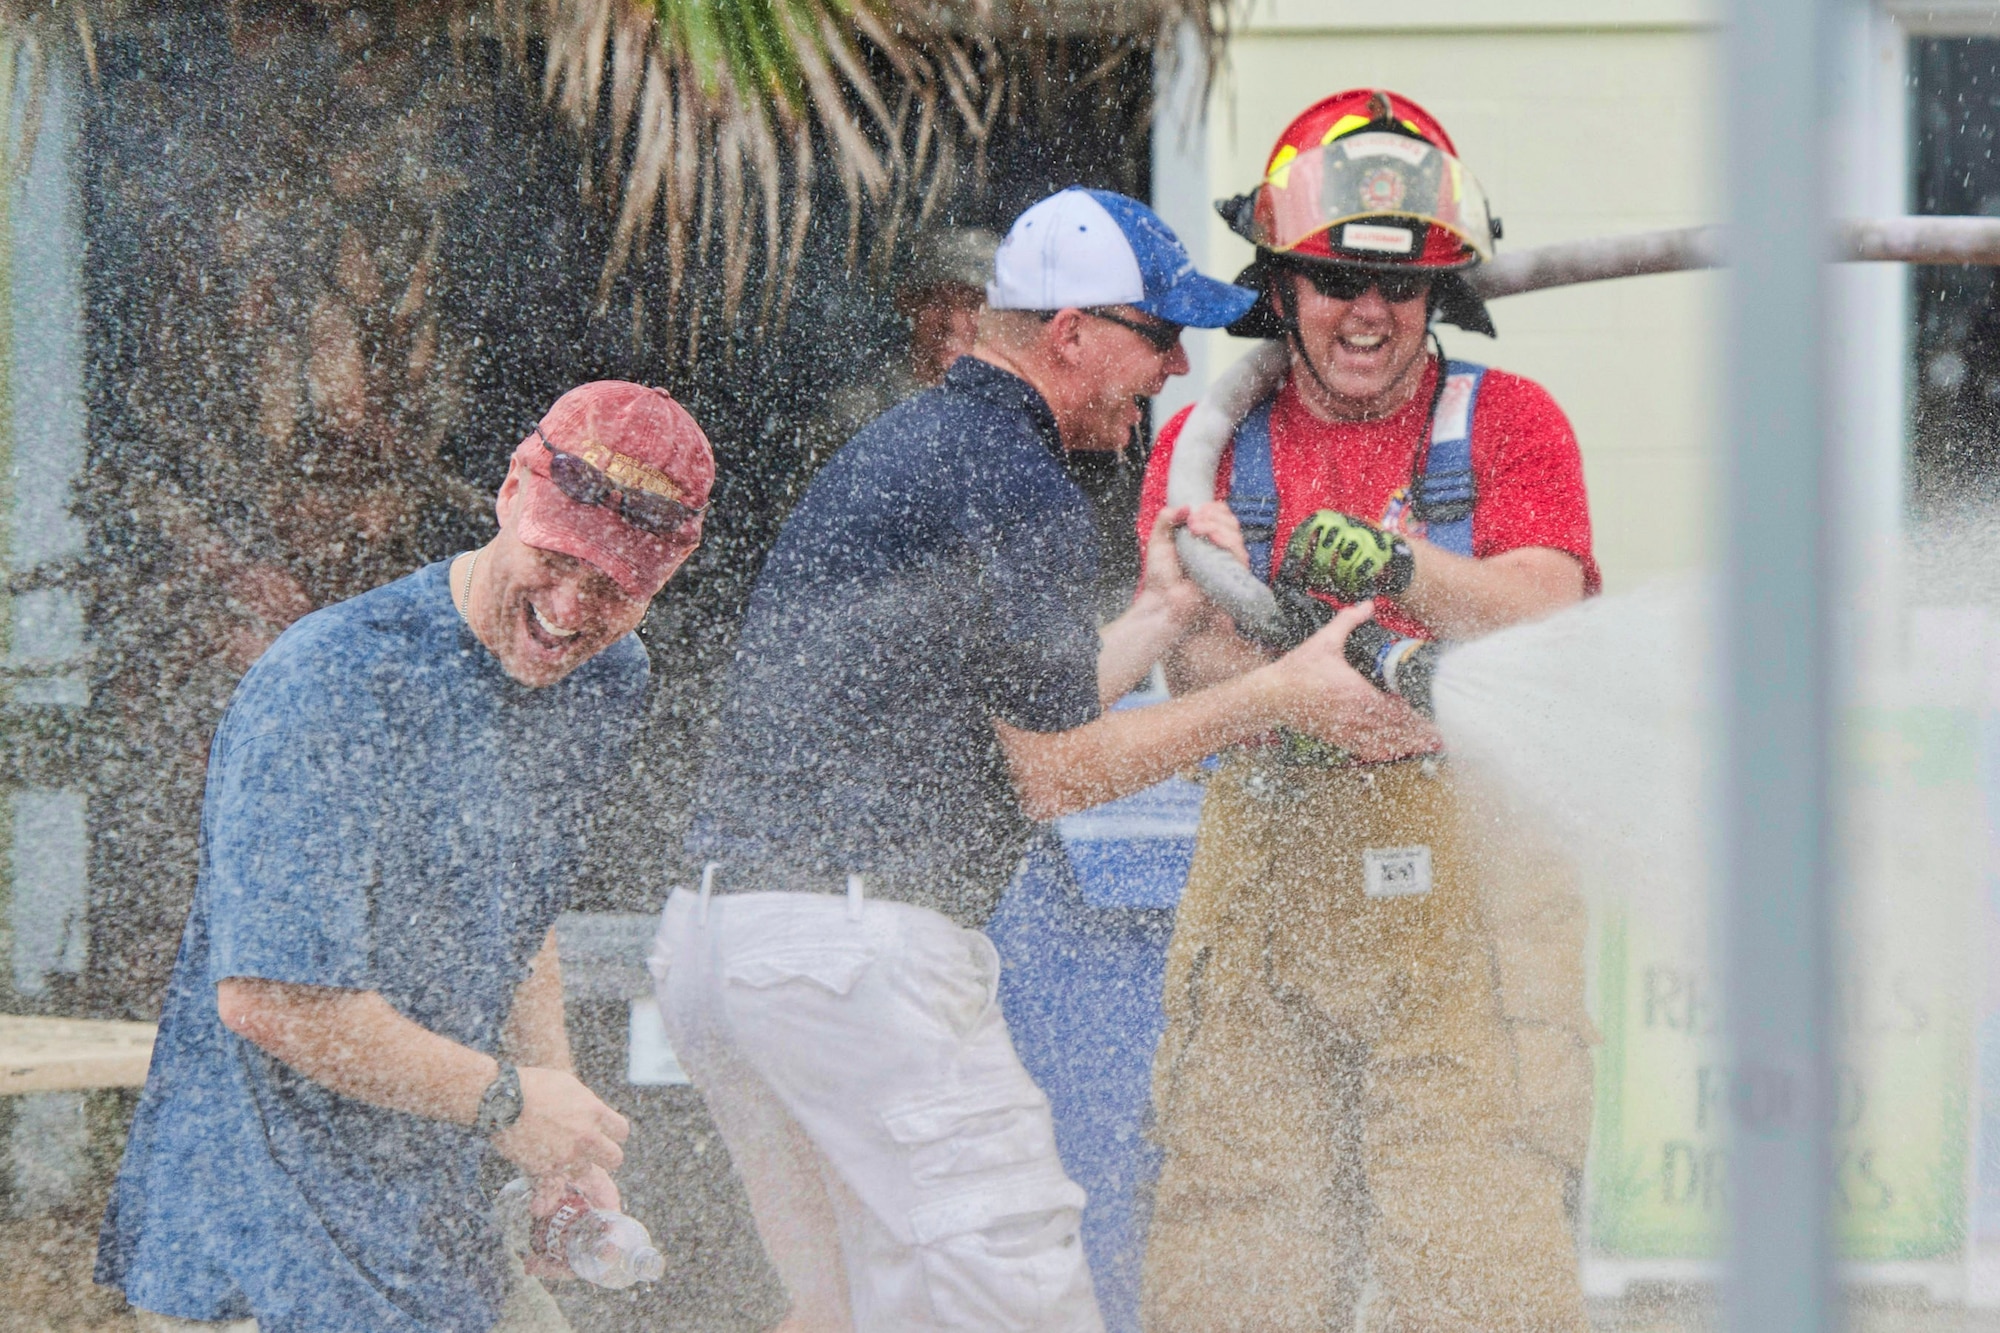 Gene Carlander, 45th Civil Engineer Squadron, sprays Col. Robert Pavelko, 45th Space Wing vice commander (left), and Chief Master Sgt. Craig Neri, 45th Space Wing command chief (center), during the Junior Enlisted Appreciation Picnic June 20 at the Patrick Air Force Base, Fla., Beach House. Senior leadership was drenched with water by junior enlisted members as part of a tradition after opening remarks. (U.S. Air Force photo/Matthew Jurgens) 